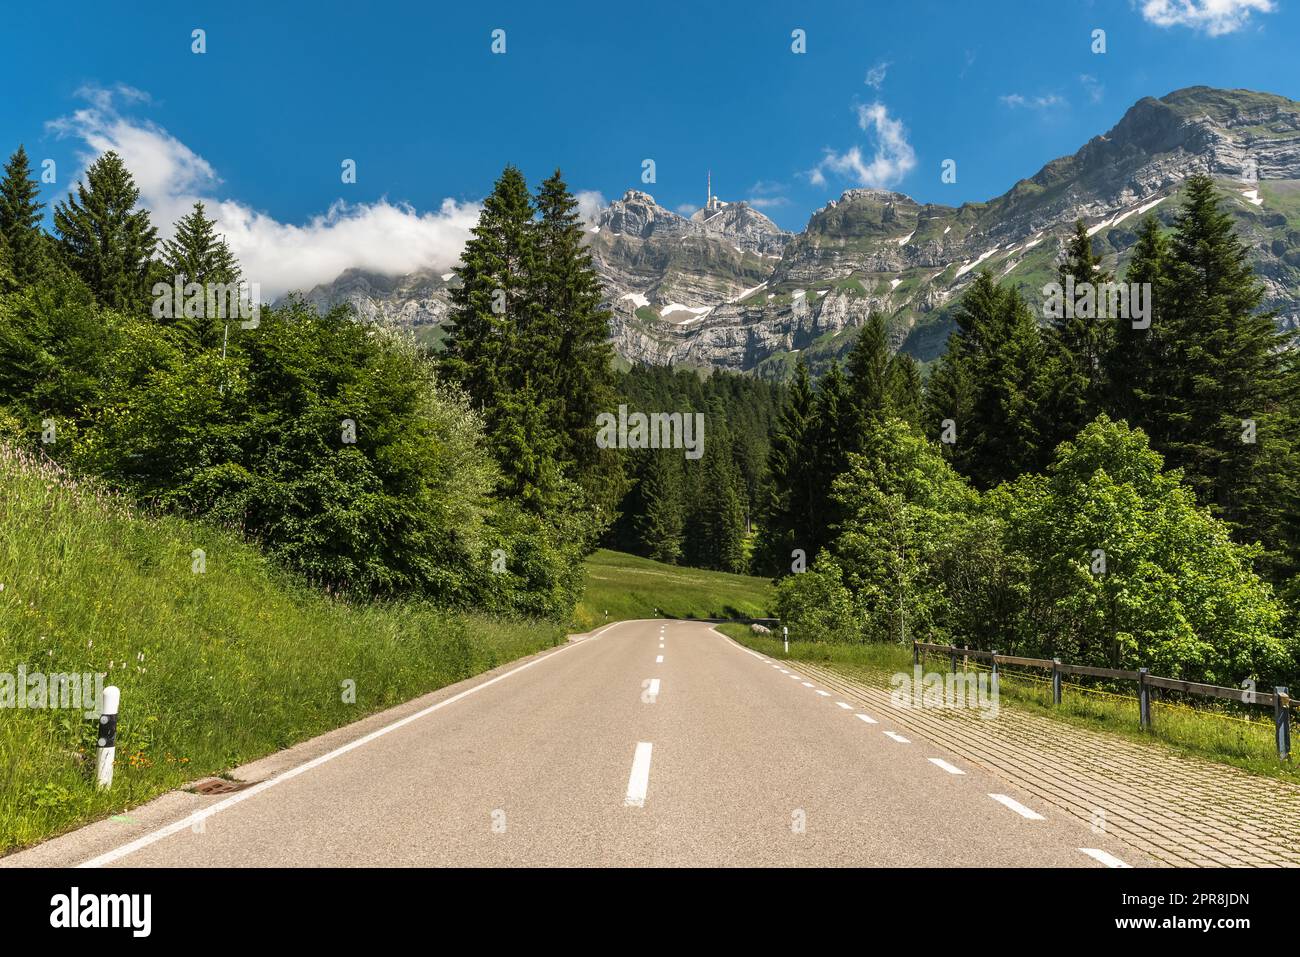 Mountain road with view of the Alpstein massif and Mount Saentis. Canton Appenzell Ausserrhoden, Switzerland Stock Photo